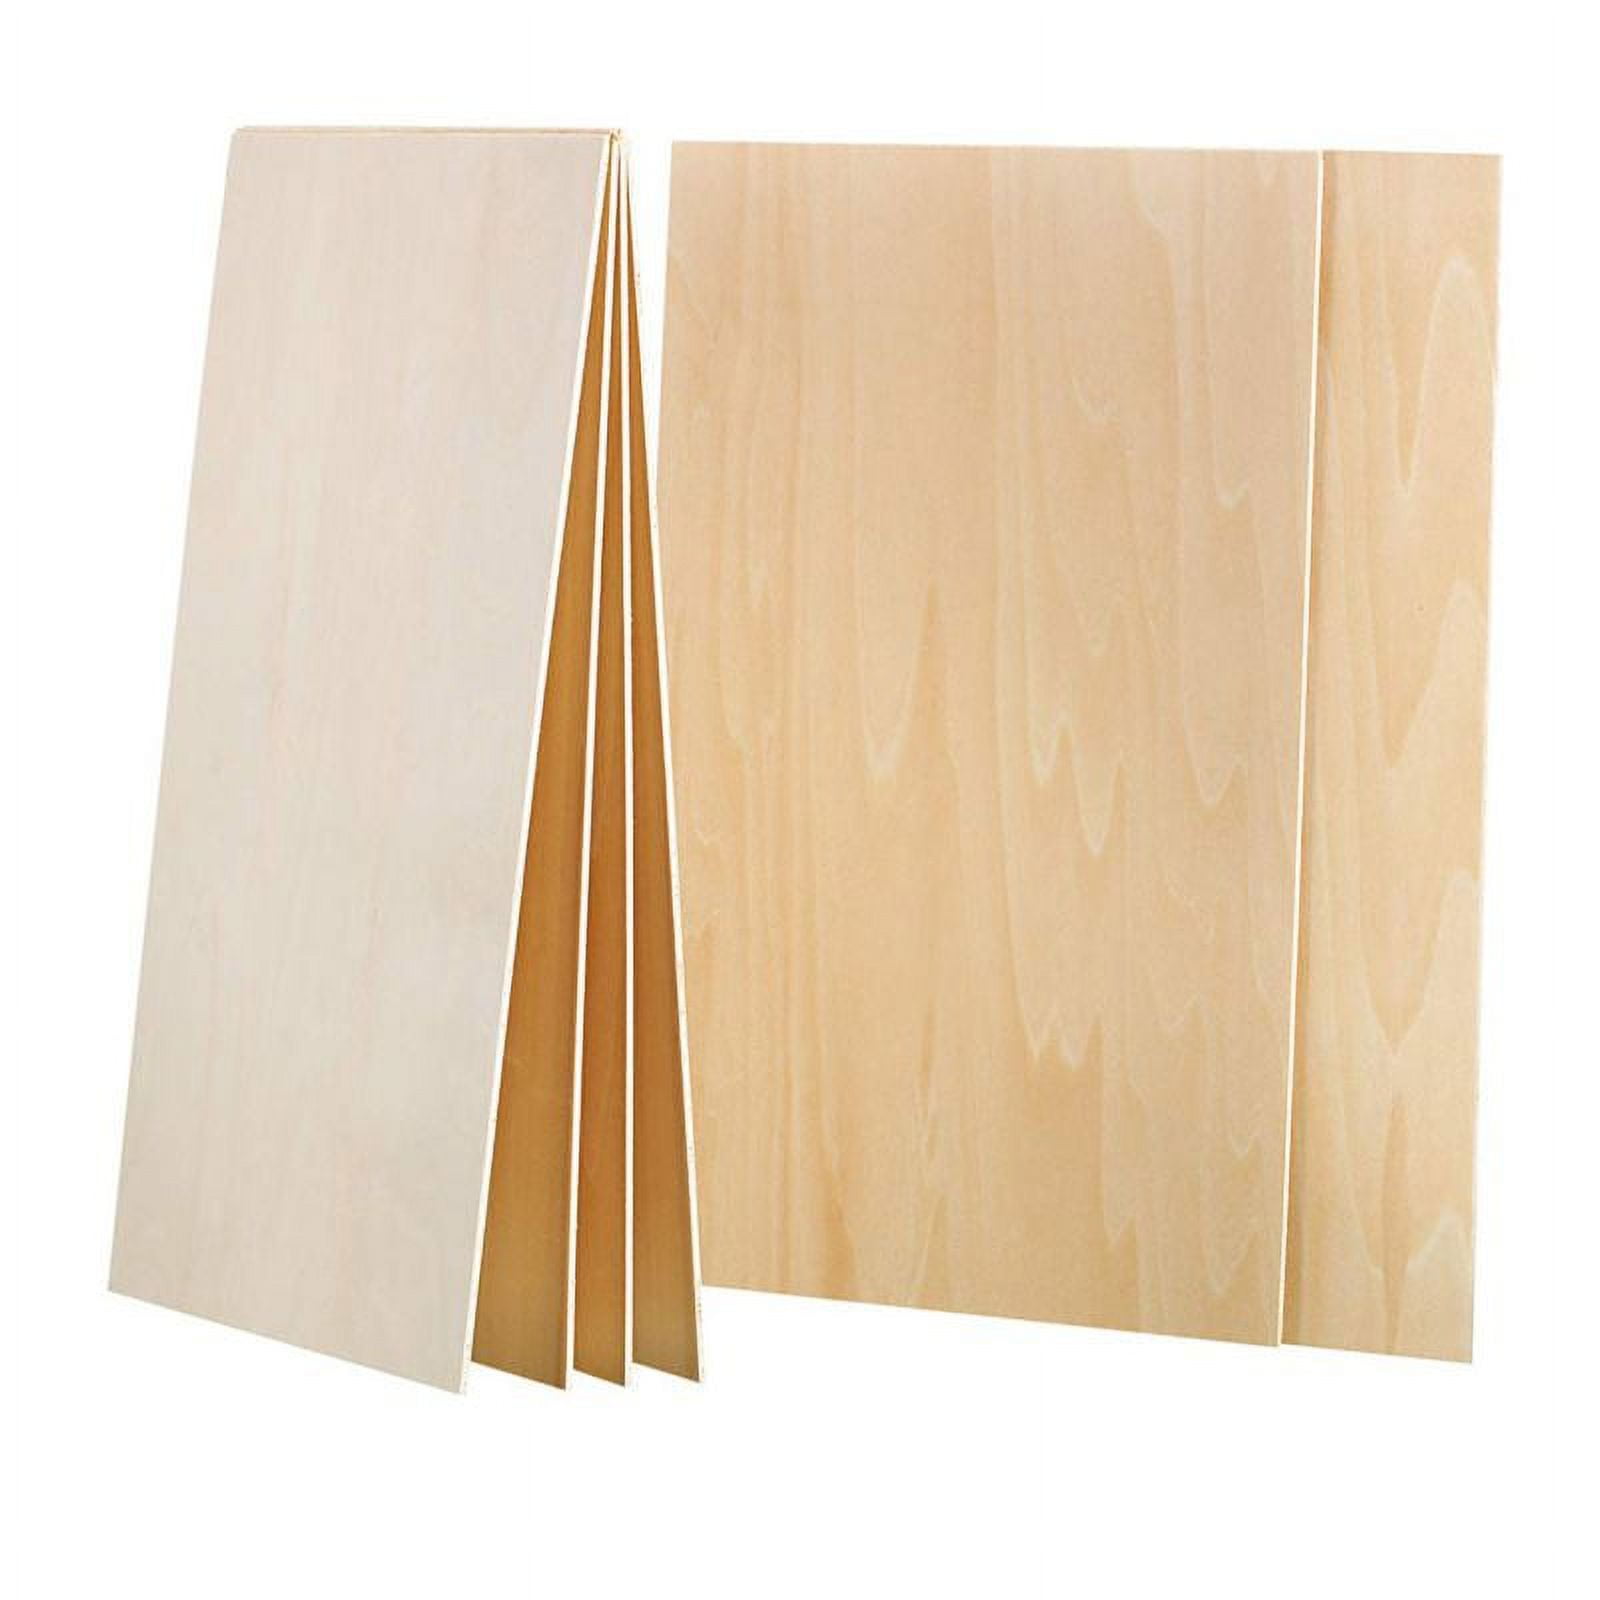 Namalu 10 Pack Balsa Wood Sheets 12 x 4 Inches Unfinished Wooden Board Wood  Sheets for Crafts House Aircraft Ship Boat Arts School Projects DIY Wooden